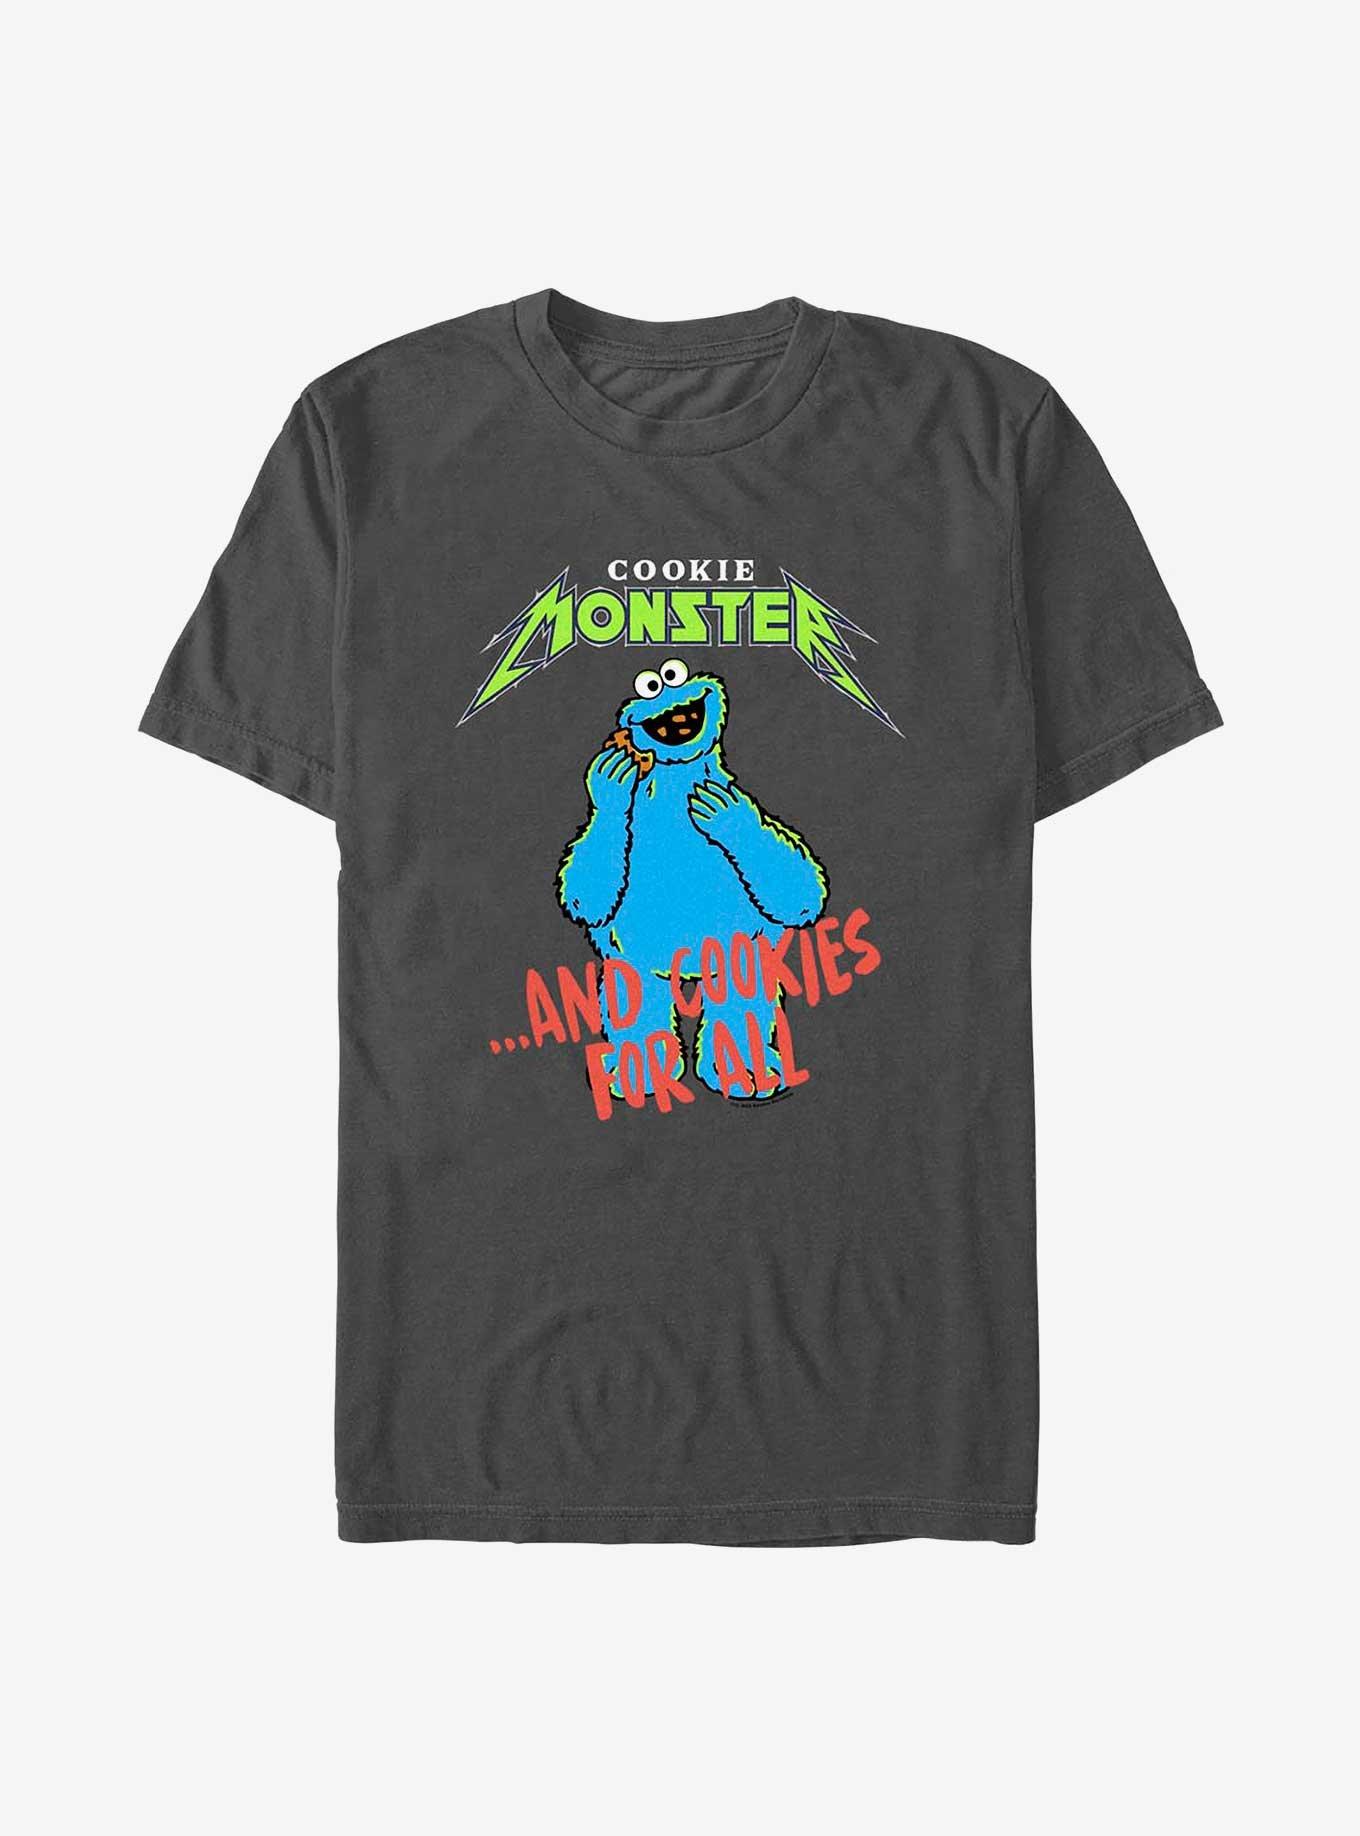 Sesame Street Cookie Monster And Cookies For All Extra Soft T-Shirt